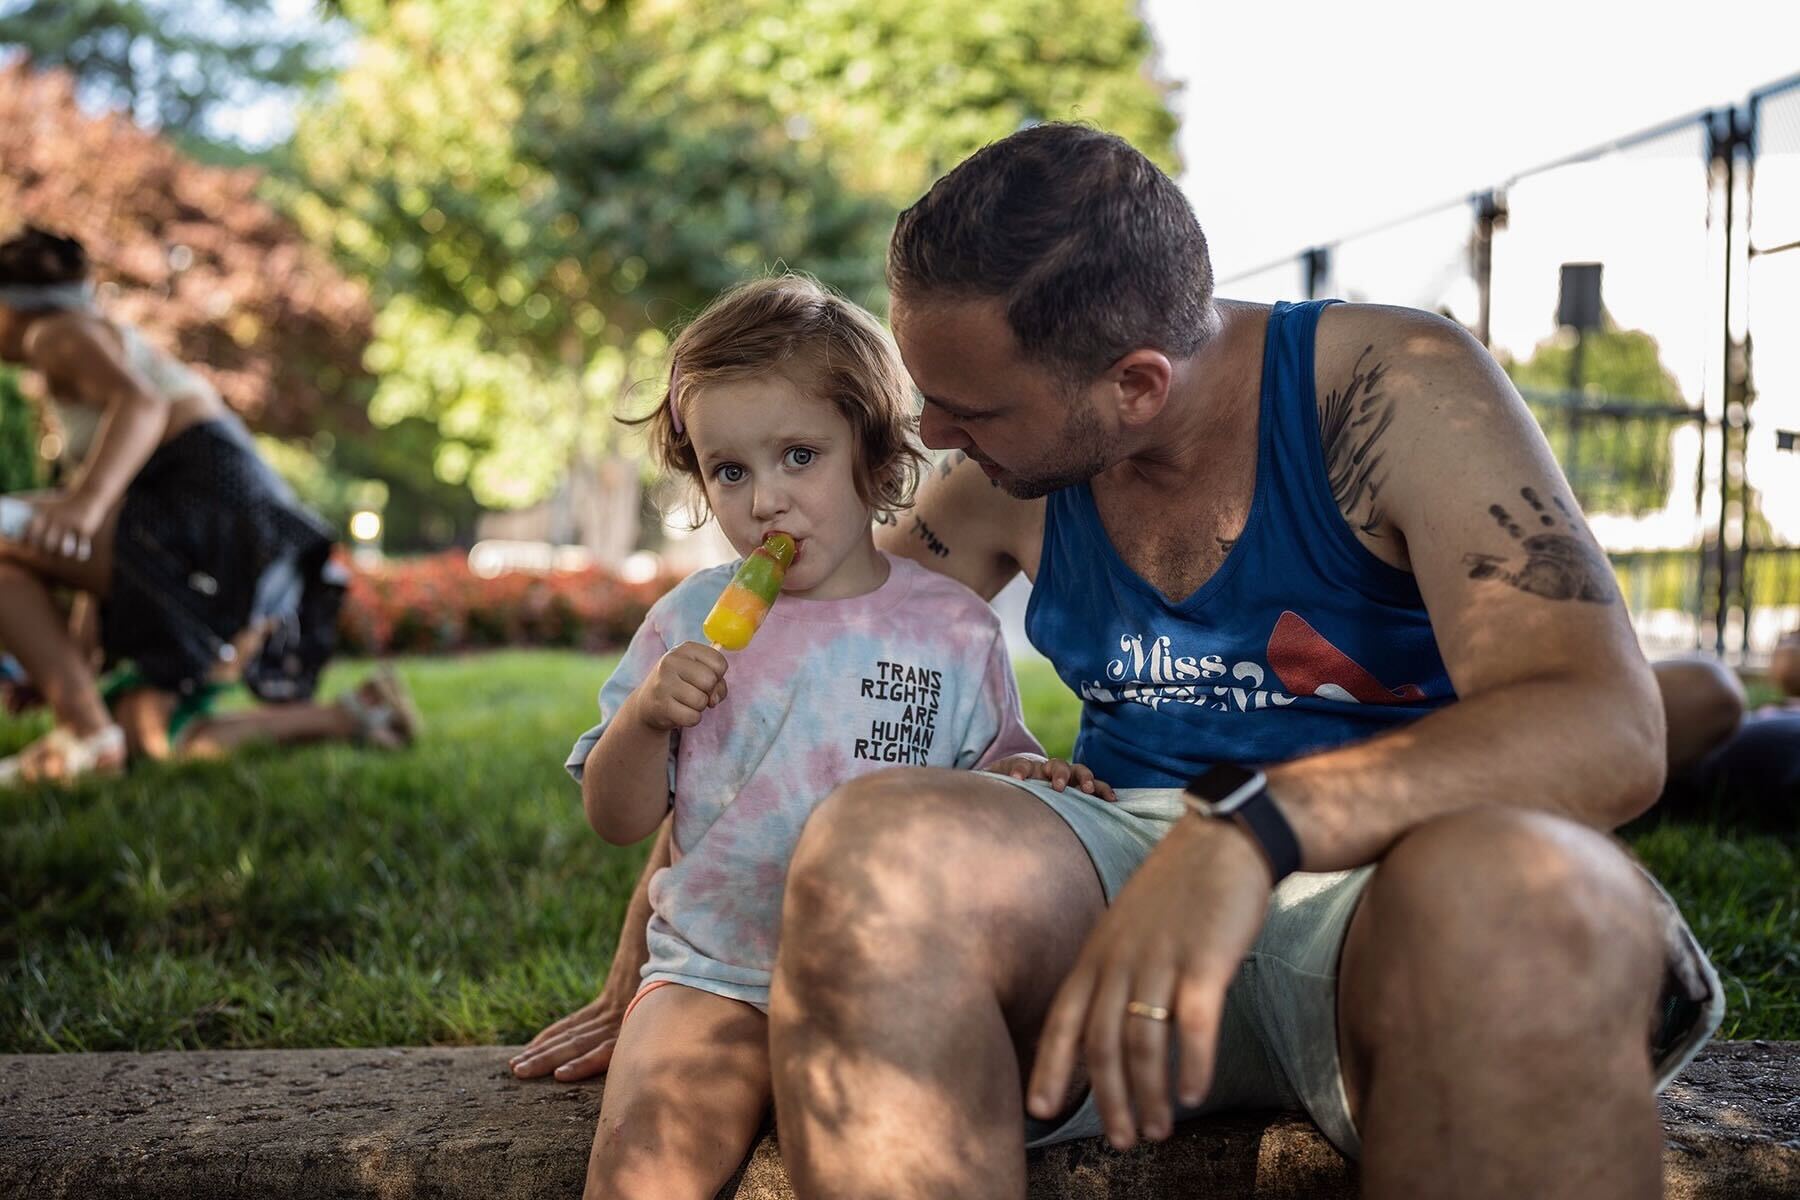 Eli Szenes-Strauss speaks to his young daughter as she eats a popsicle in the midst of a rally. Daughter Etta wears a shirt that reads "trans rights are human rights."